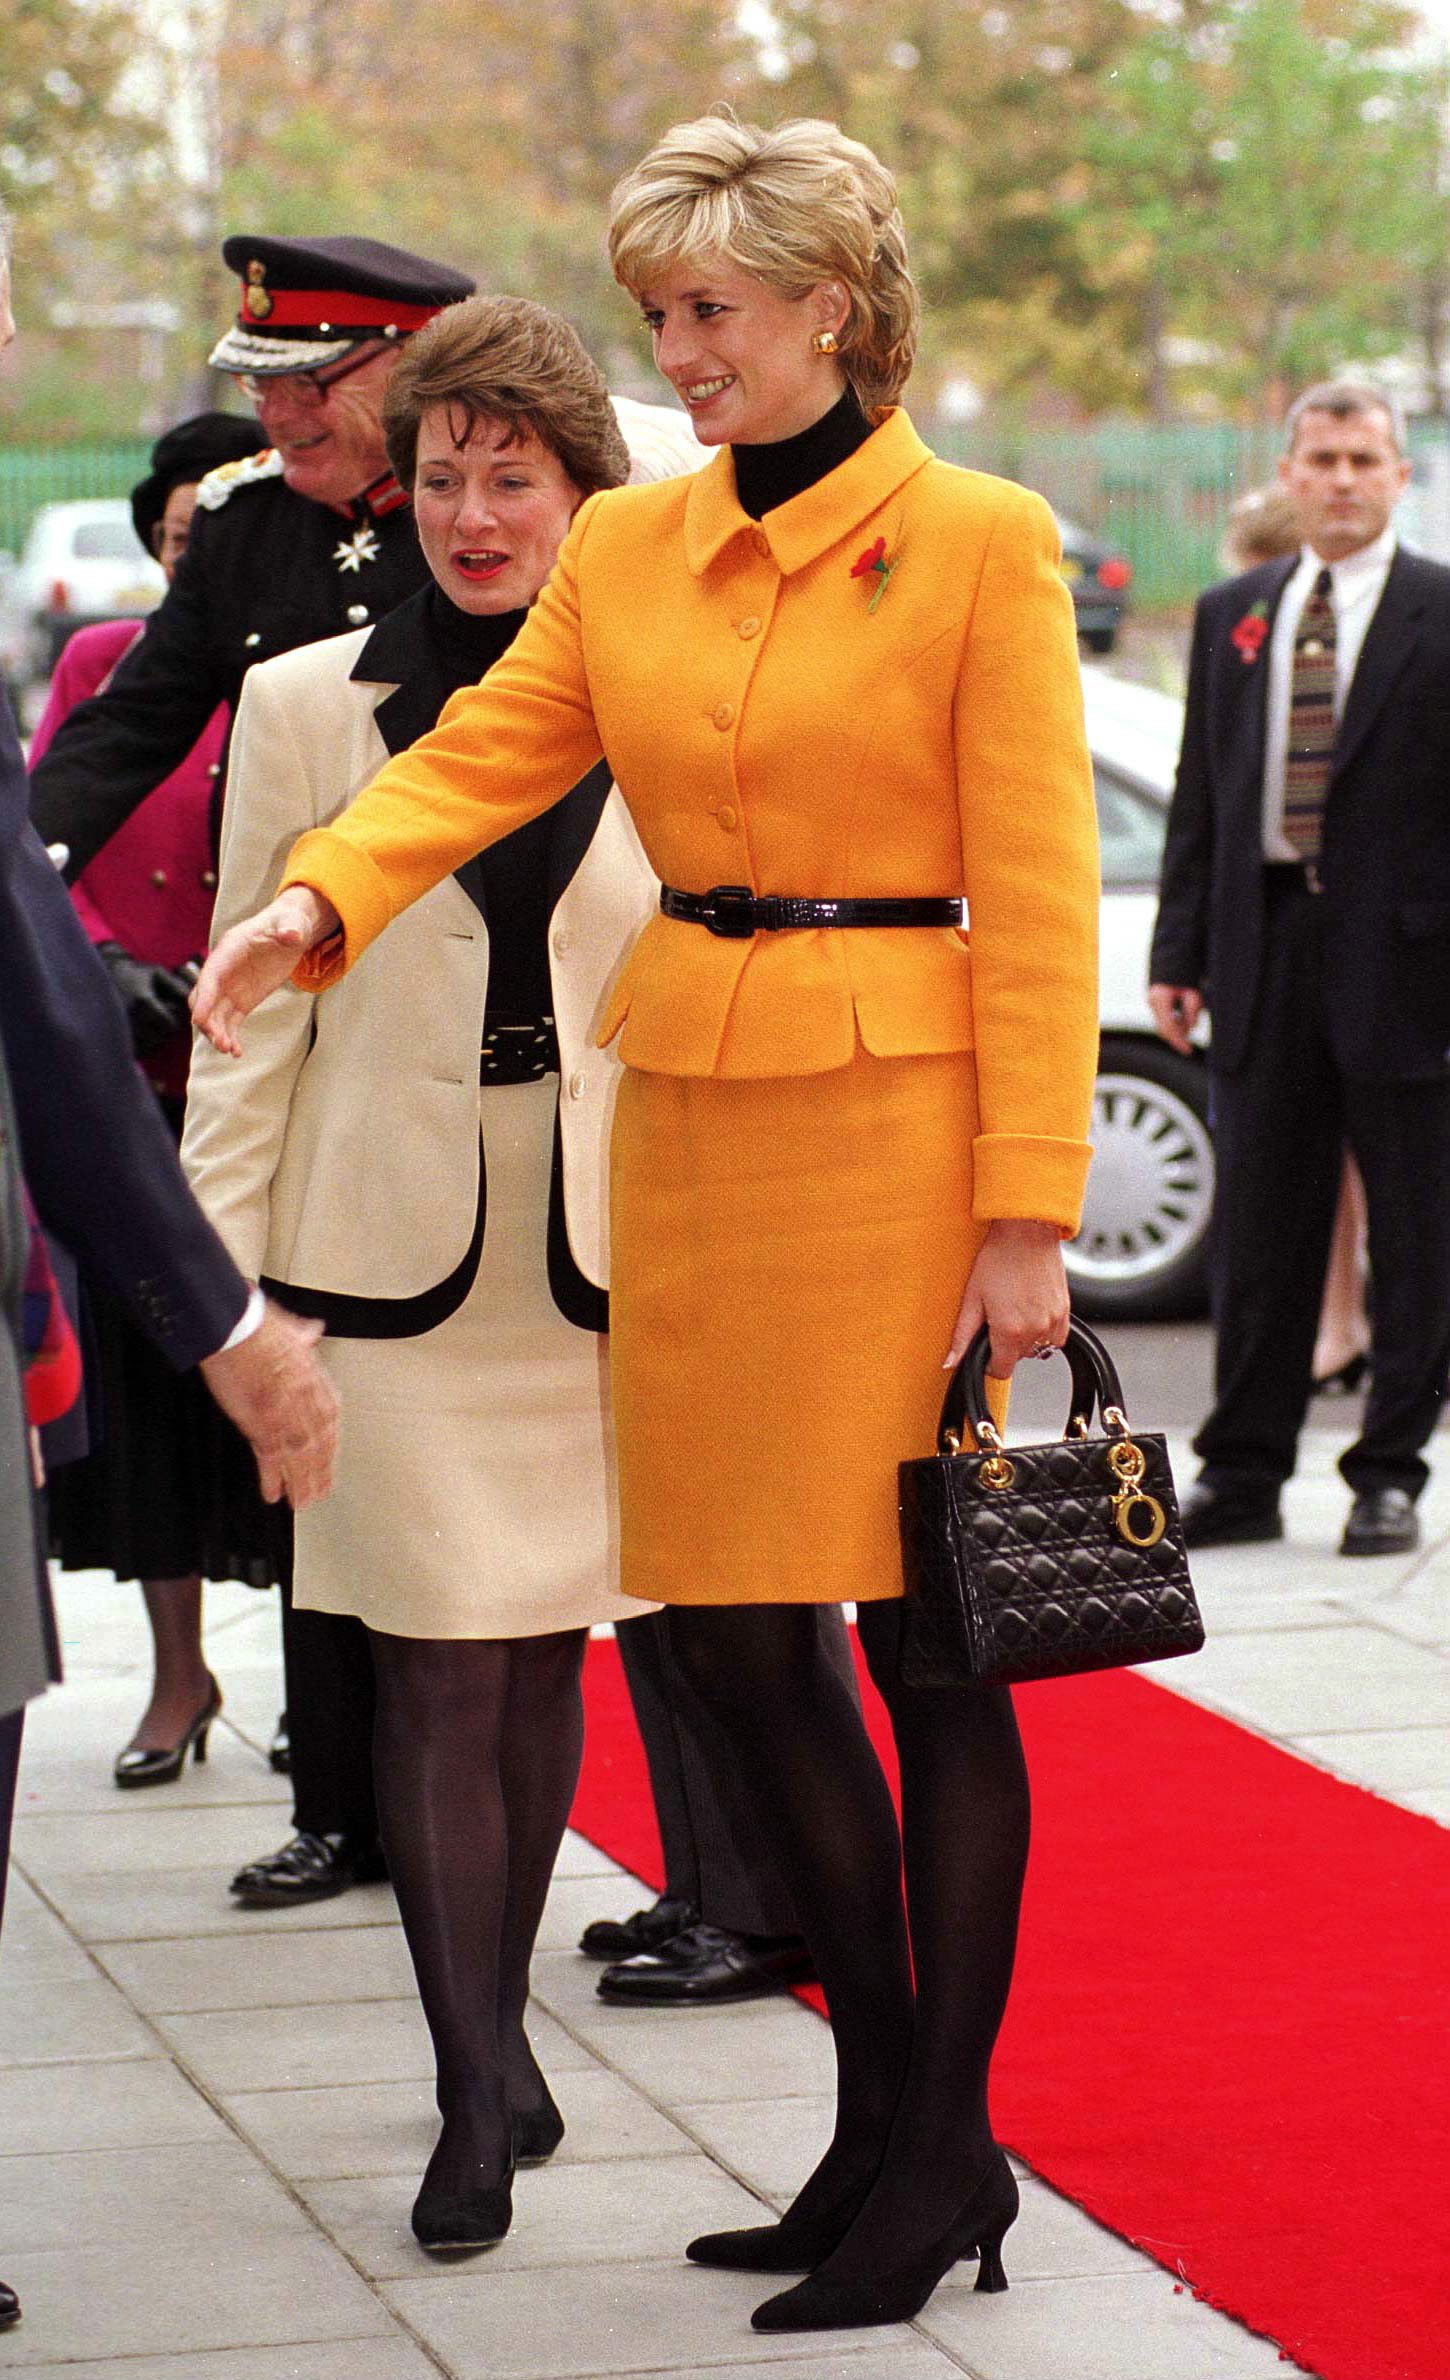 Princess Diana carries a Lady Dior handbag at a public engagement in Liverpool, in the UK. Photo: Getty Images